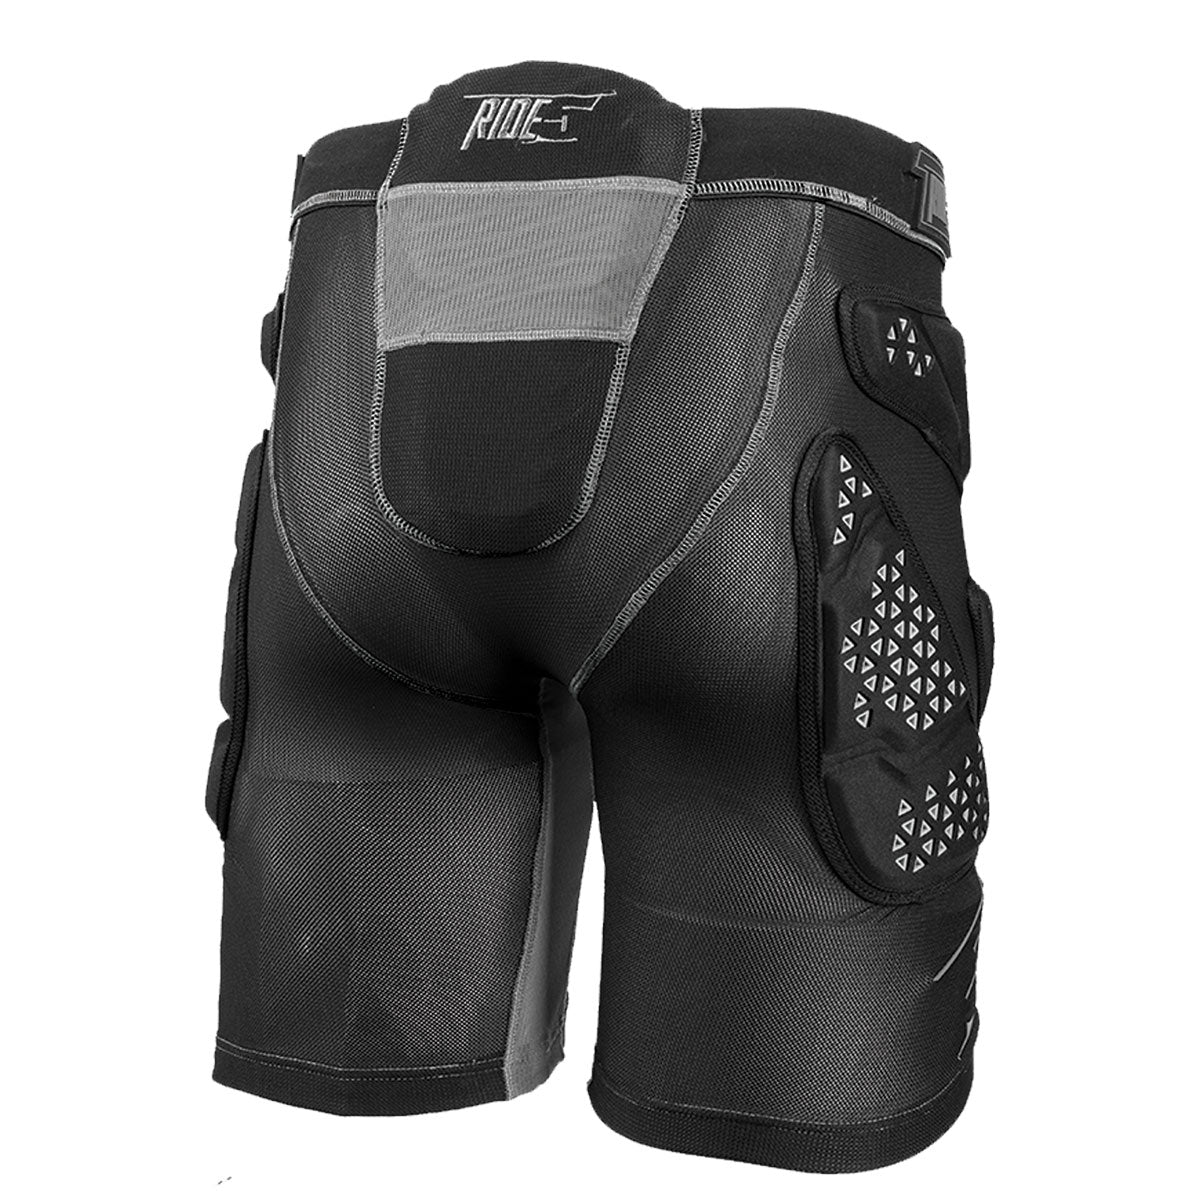 509 R - Mor Protection Riding Short F12000300-130-001